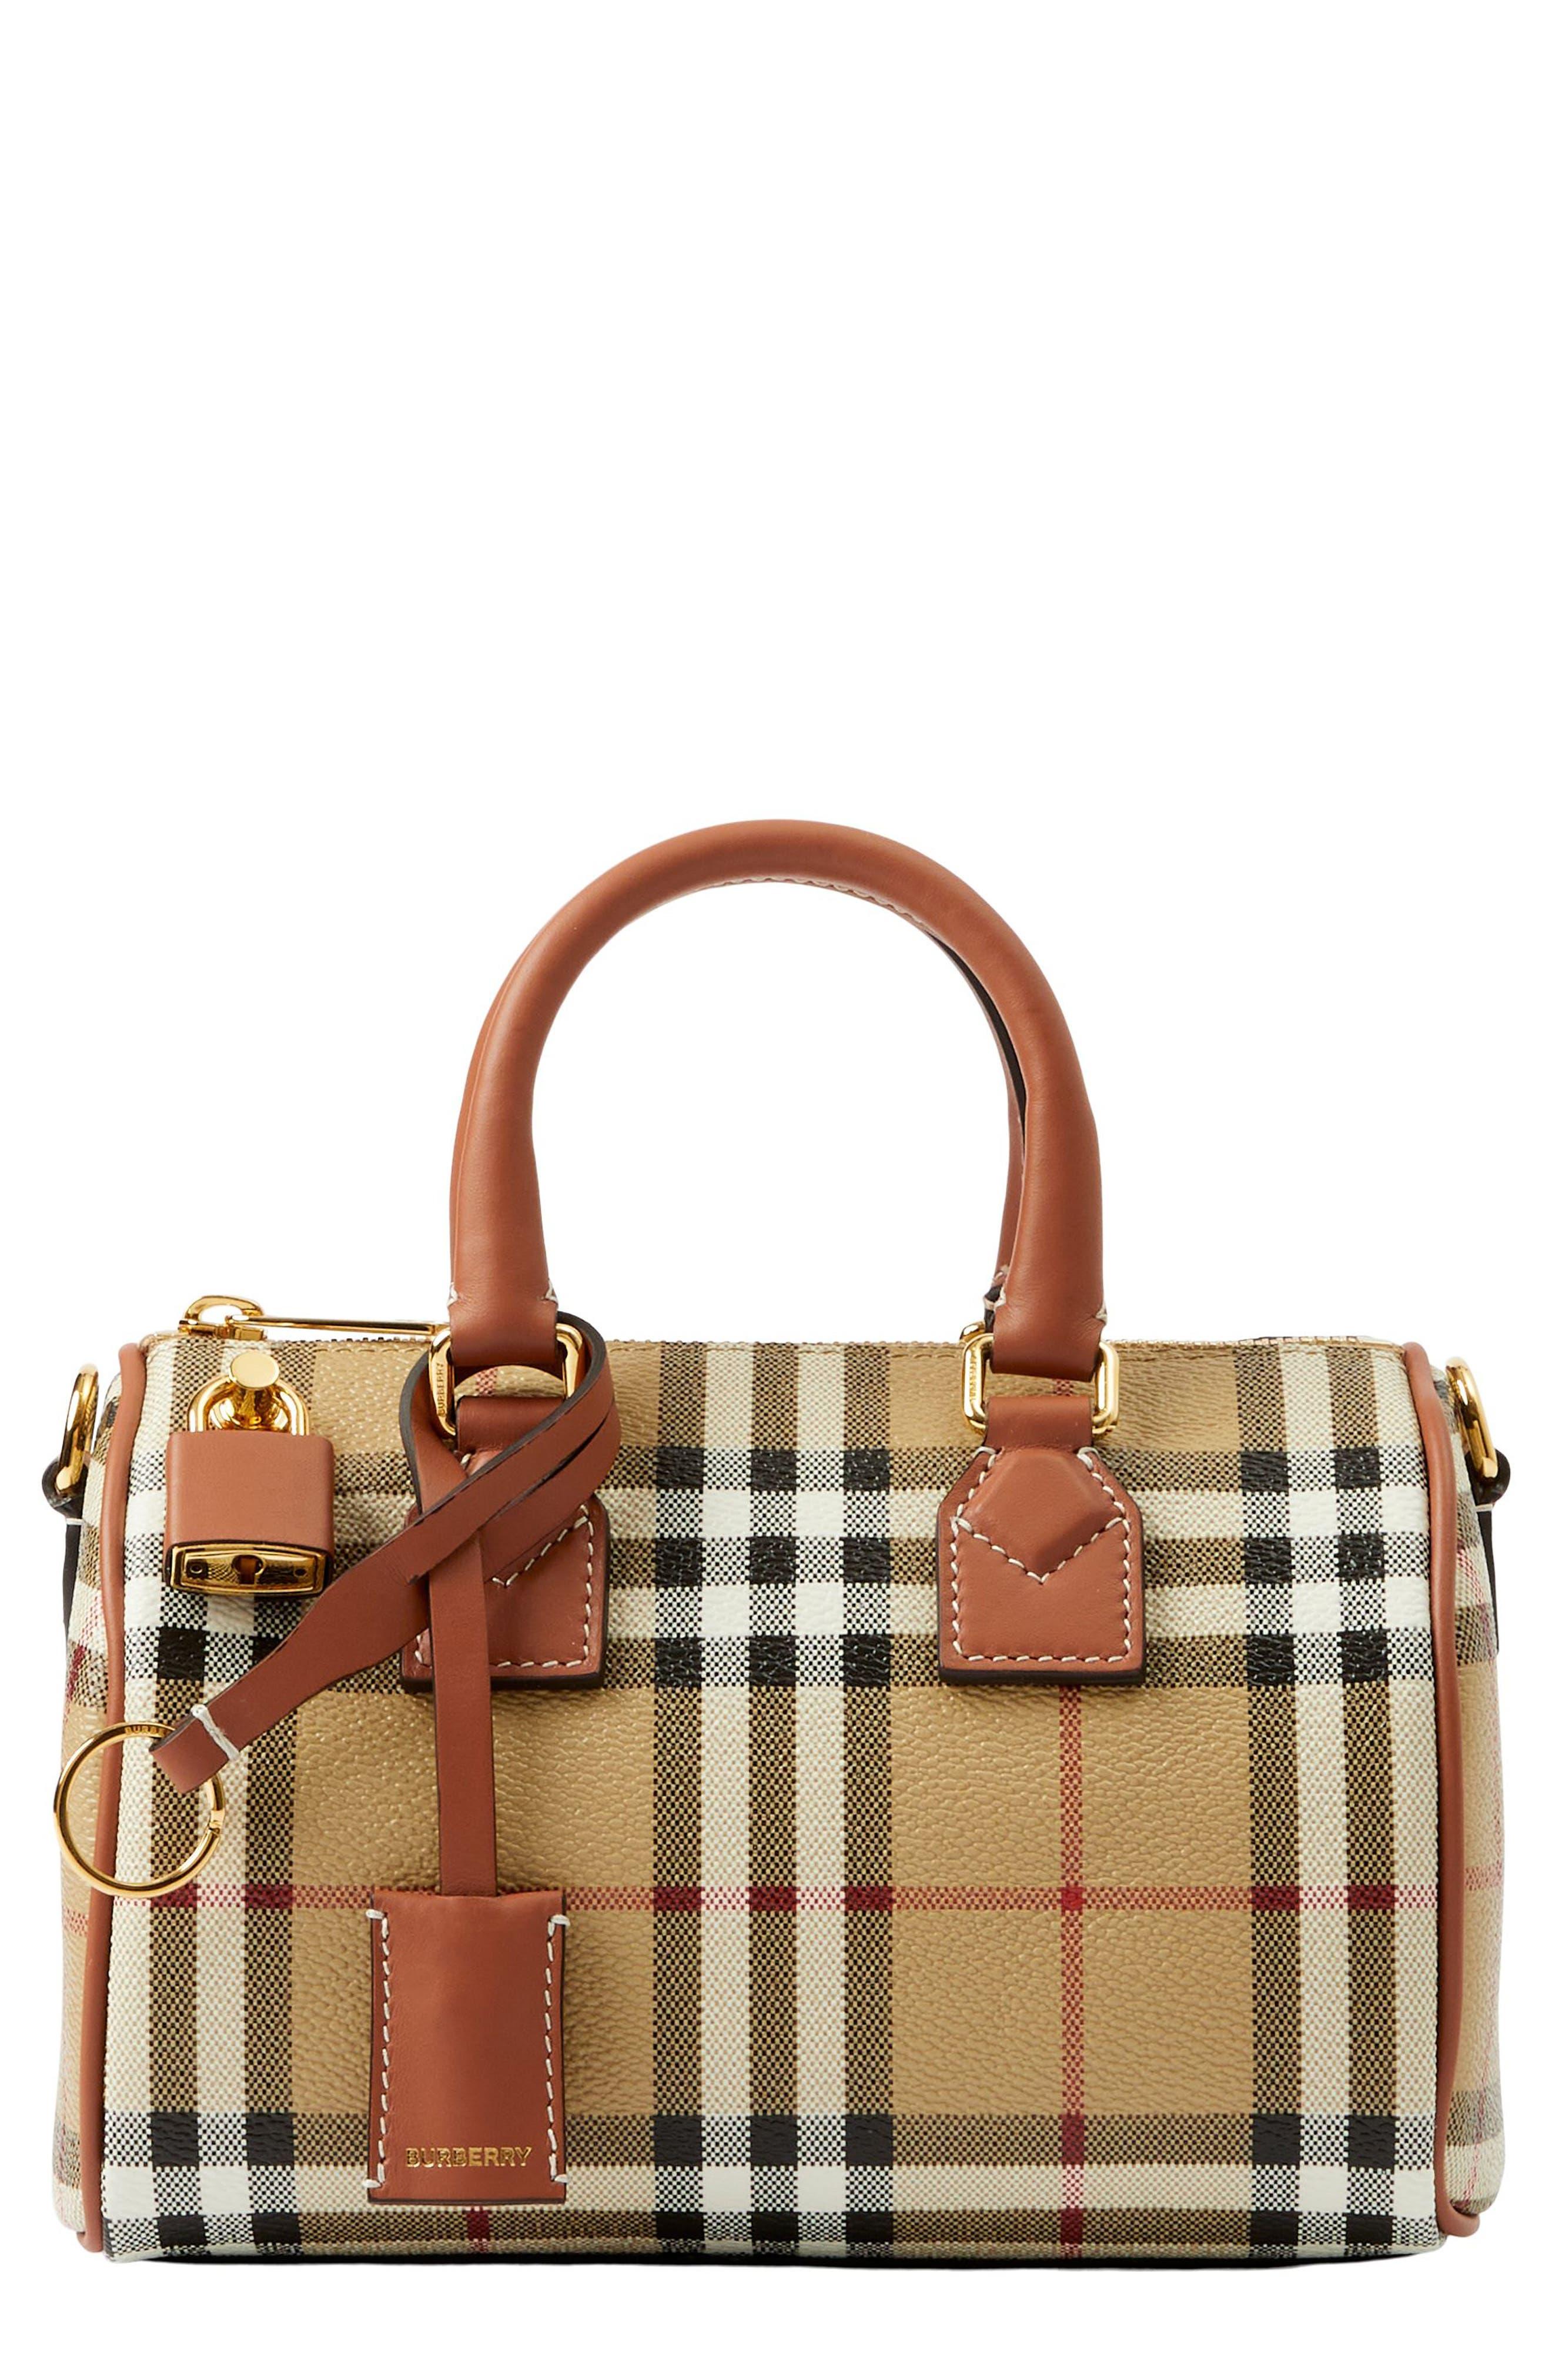 Burberry Bowling Check Mini Bag in Natural